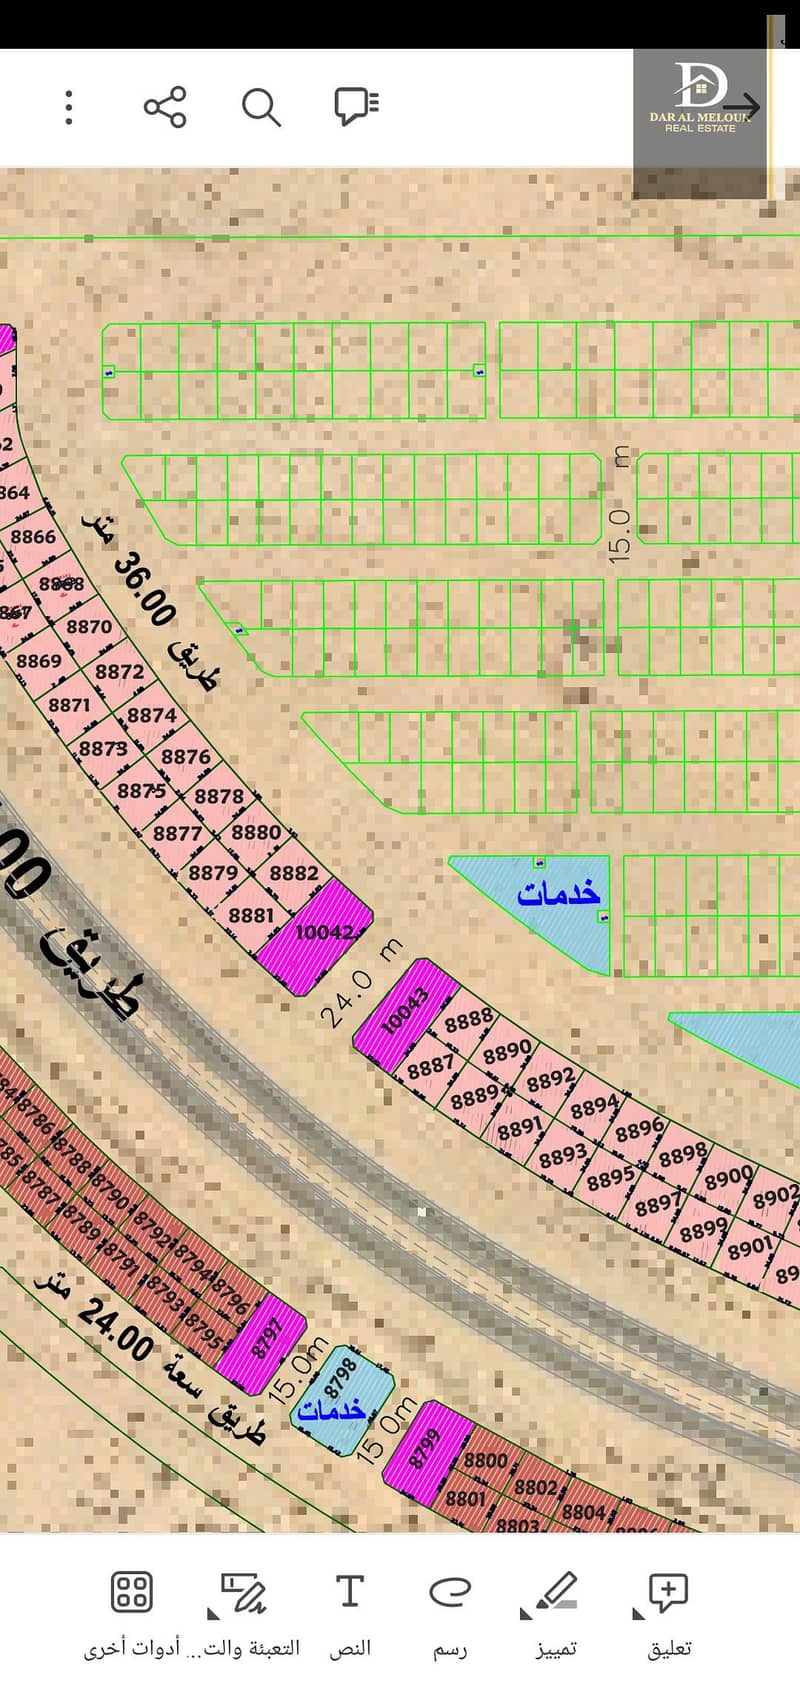 For sale in Sharjah, Muzaira’a area, Al-Rahmaniyah suburb, commercial and residential land, area of ​​5,300 feet, ground permit, two storerooms, and the first excellent location, the second piece of the main street in front of all services. The Muzaira’a